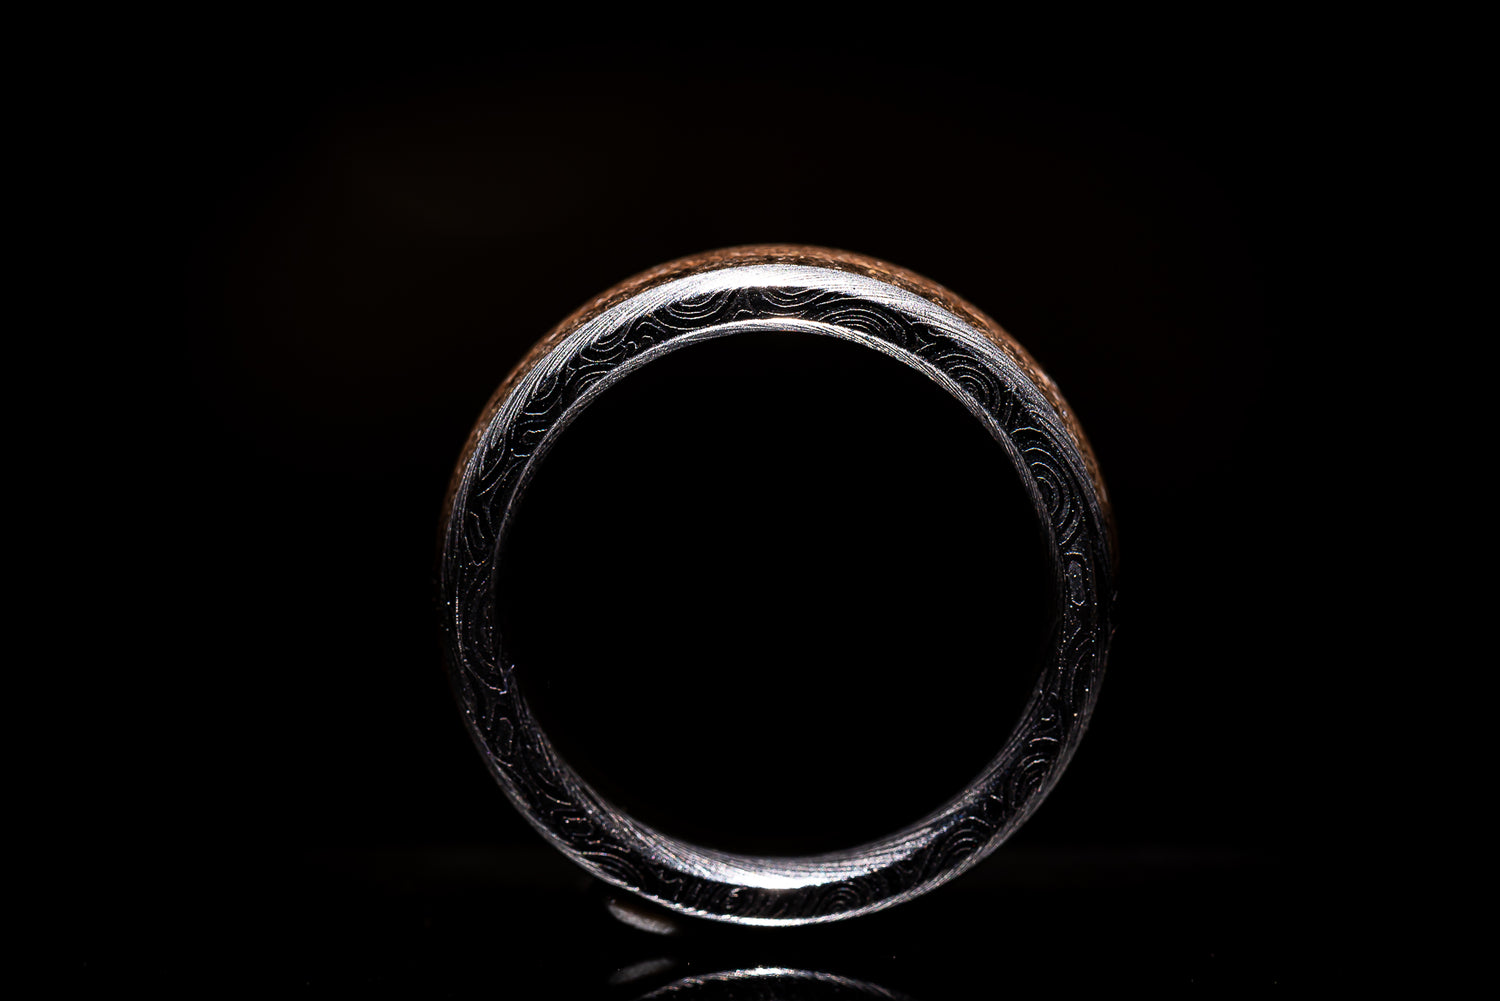 The Sand Ring - Black Ceramic Core – Sangreal Rings